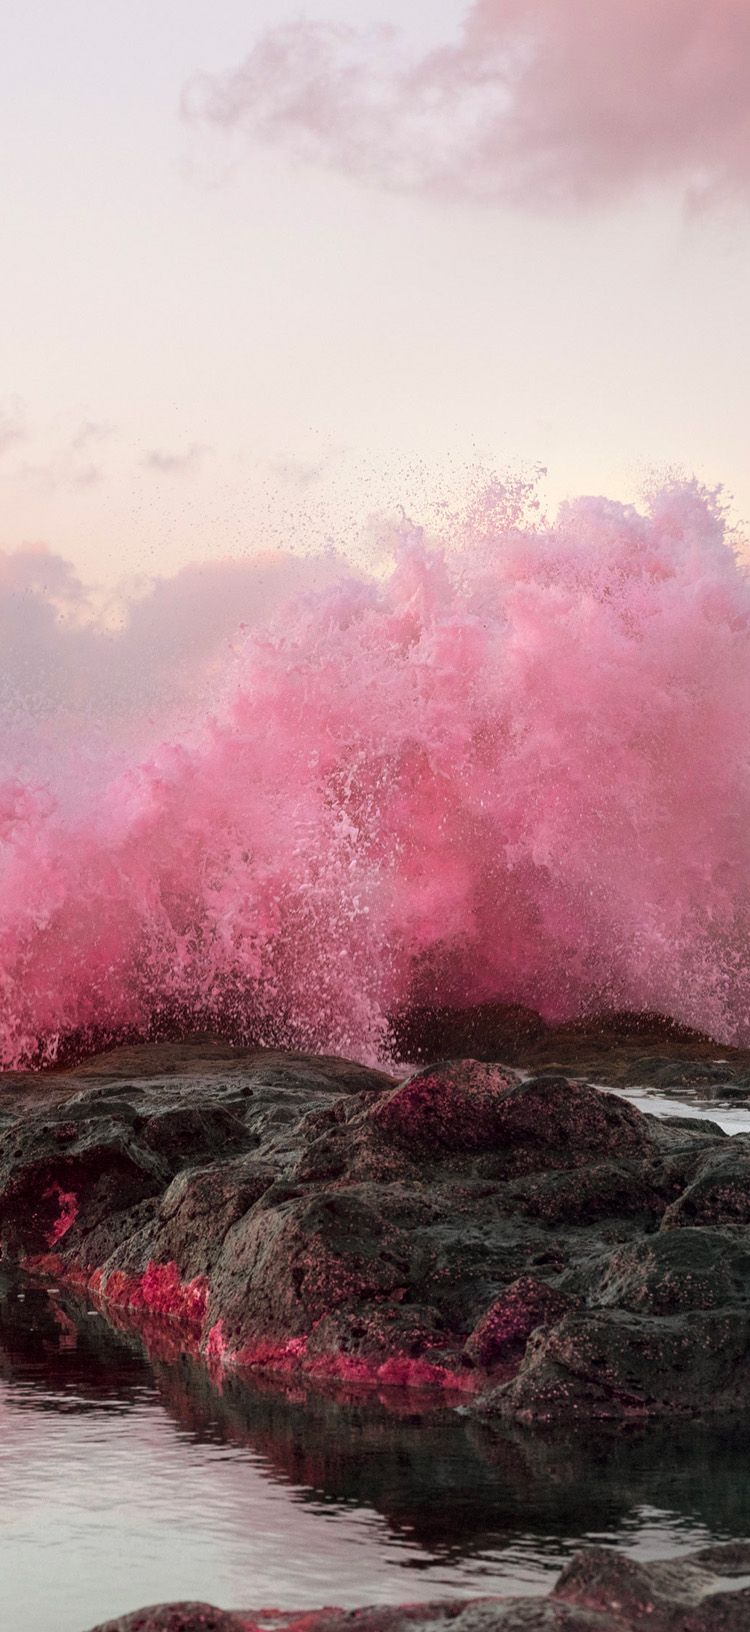 Inka & Niclas Lindergård Take Dazzling Photos of Nature to Challenge Our Expectations Of It